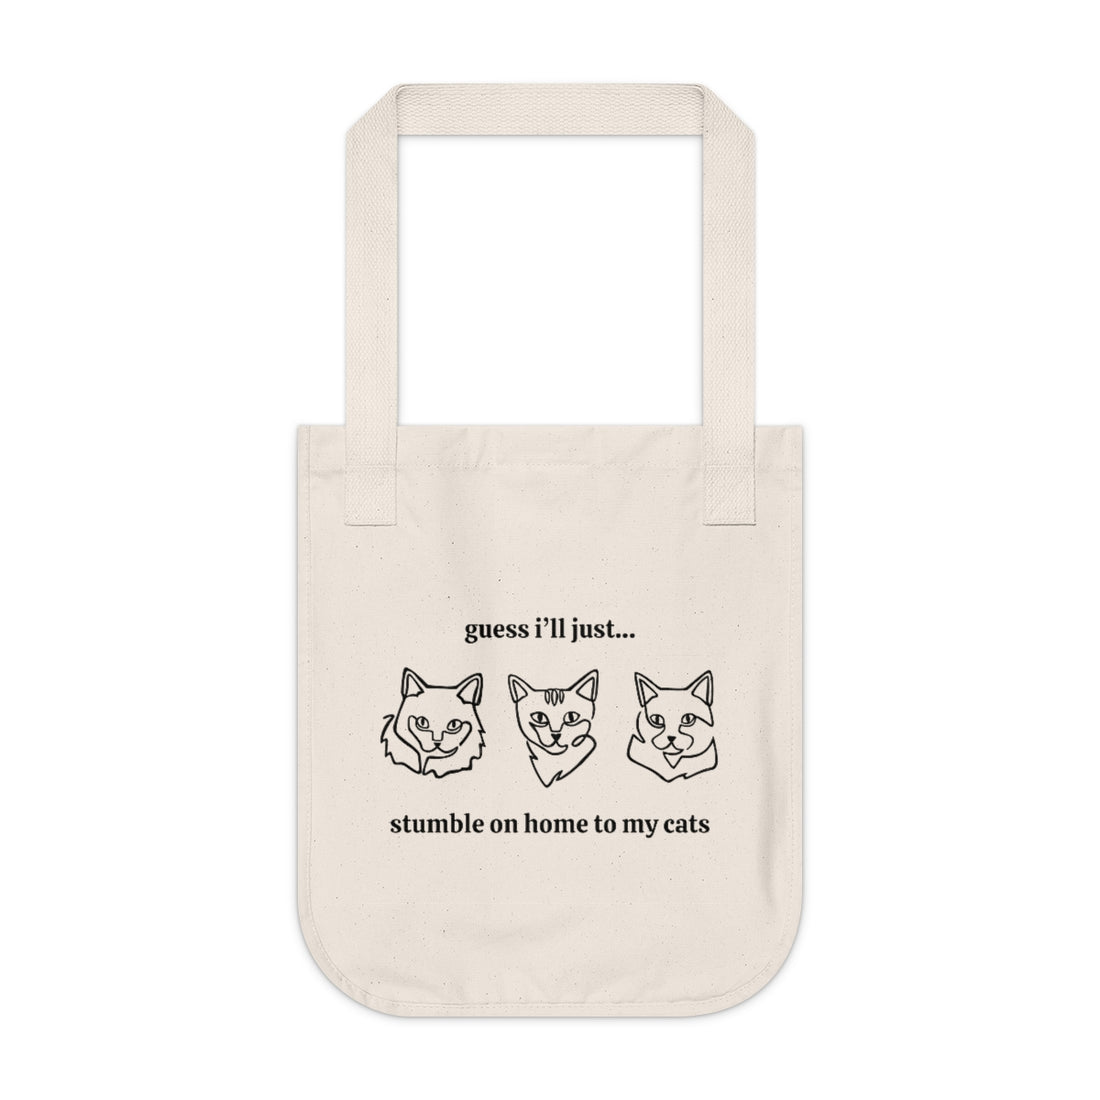 At Home With My Cats Tote